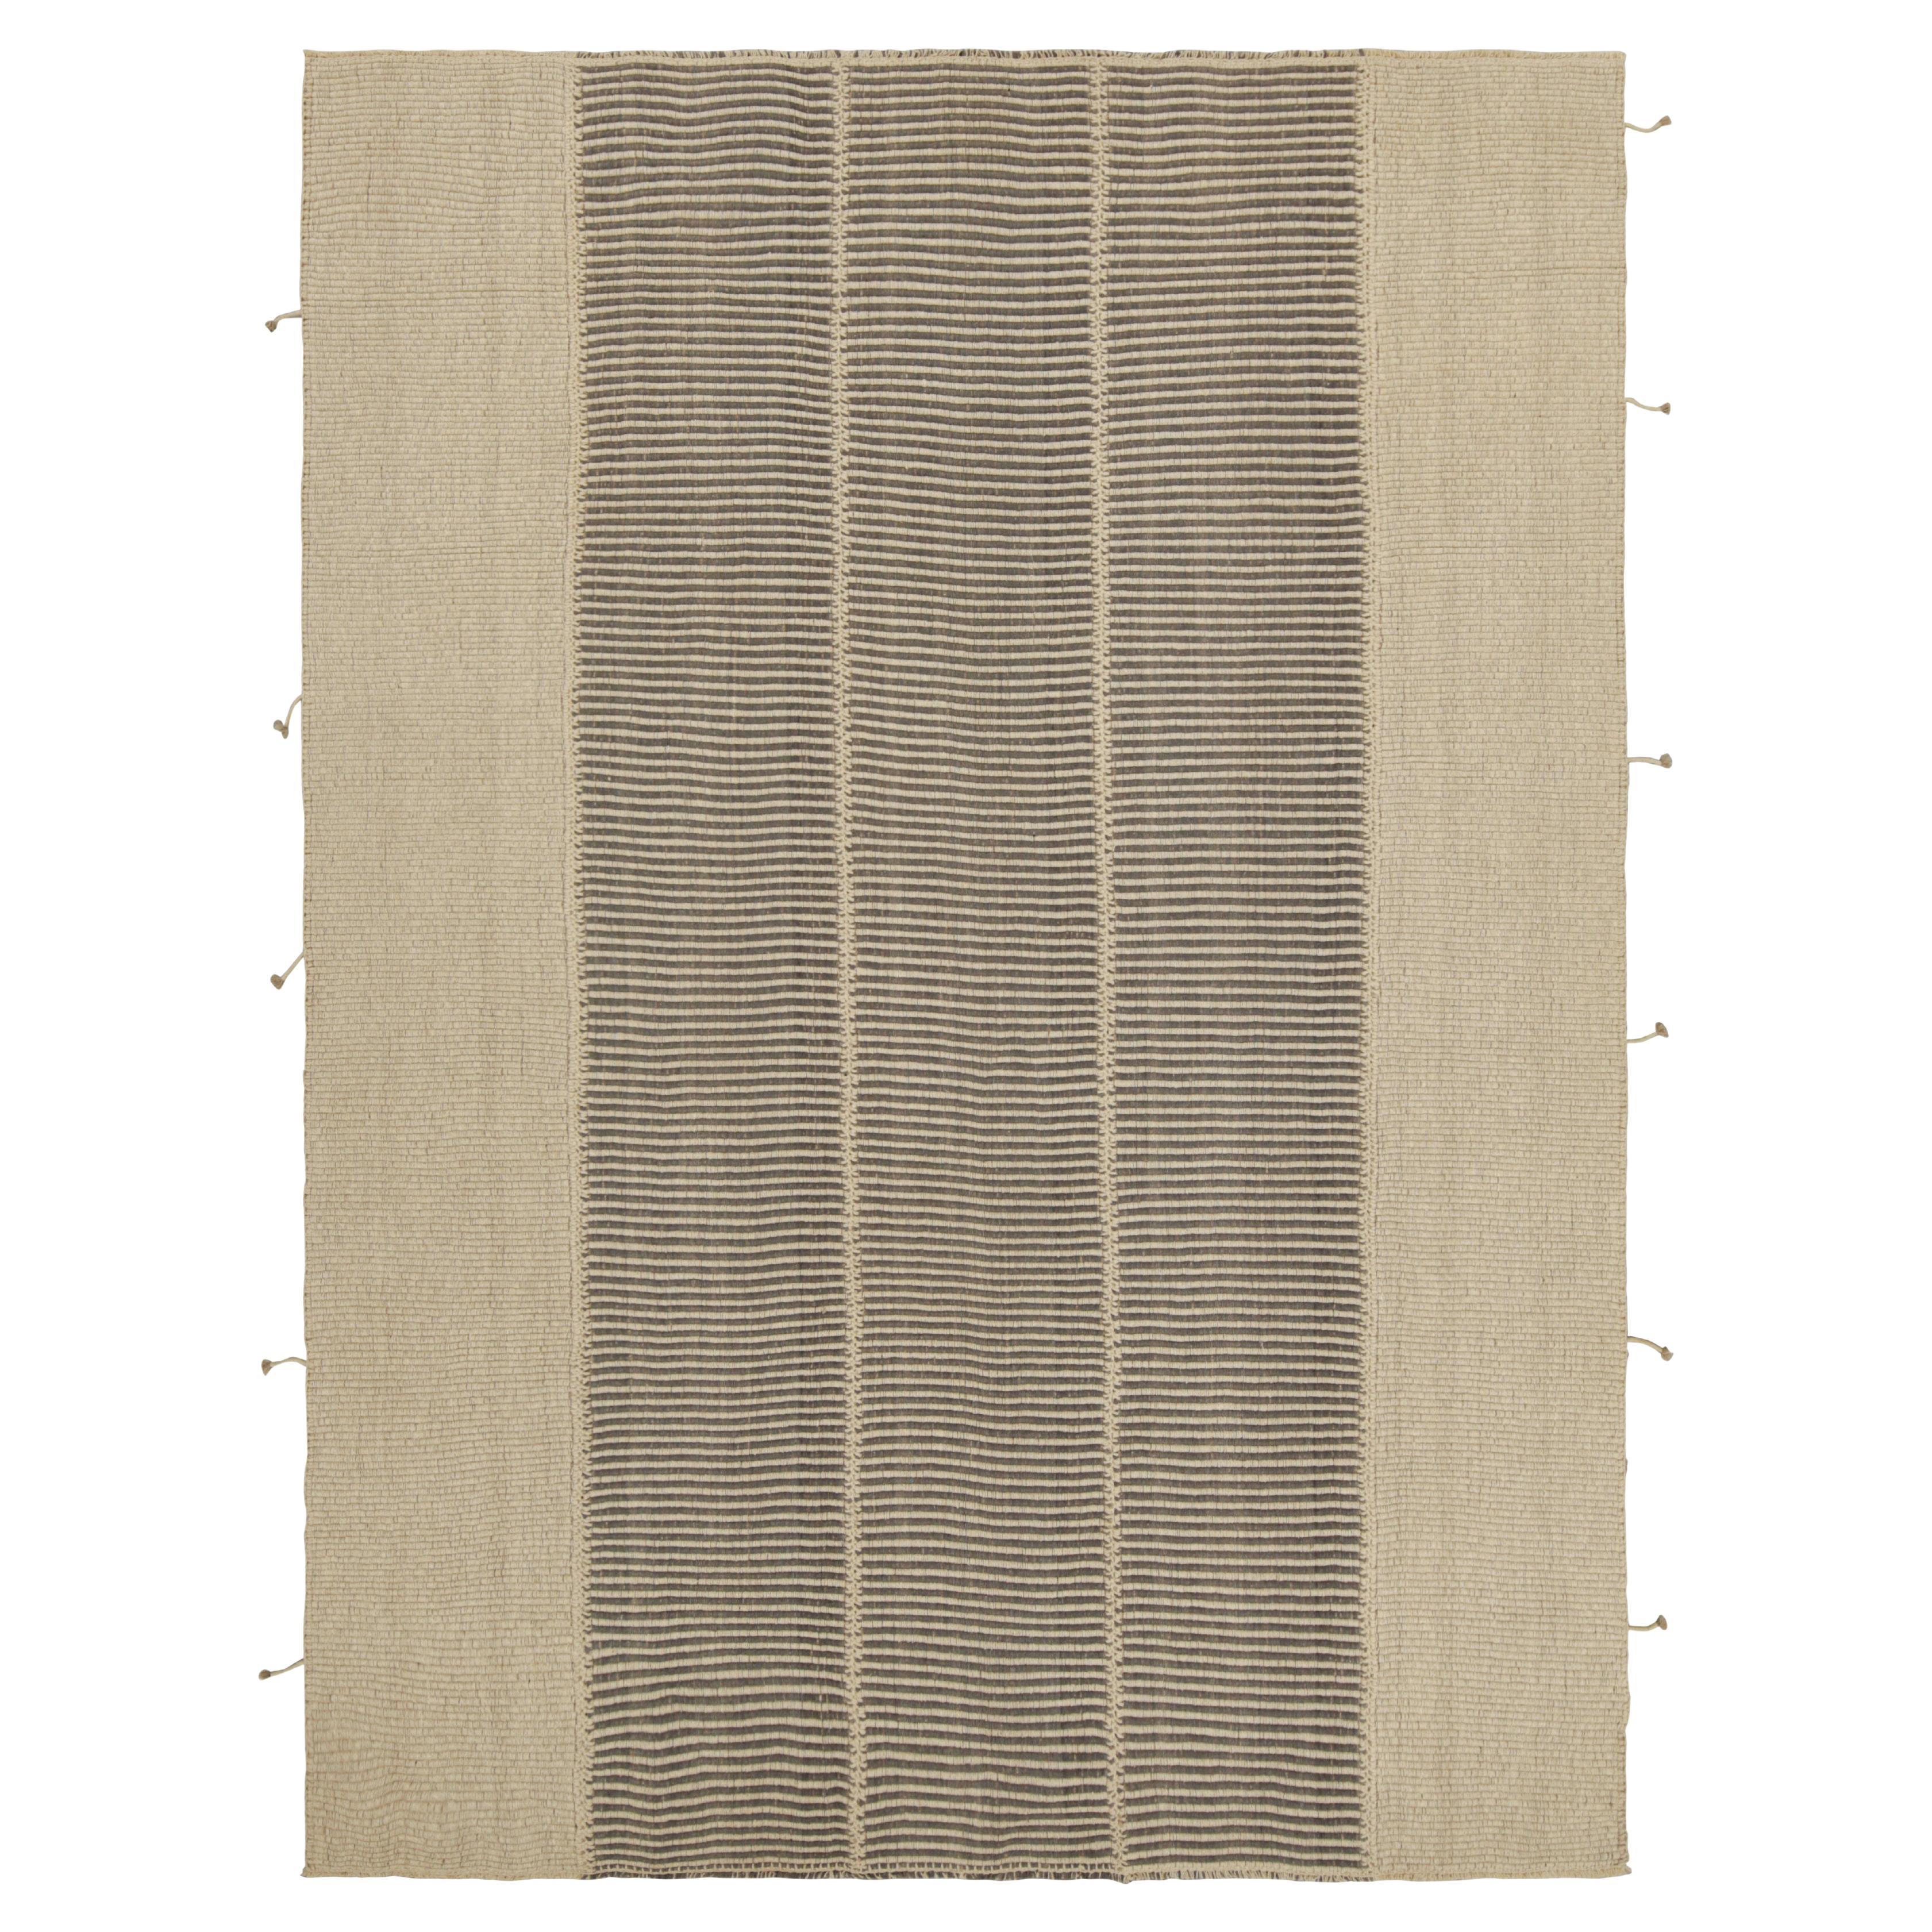 Rug & Kilim’s Contemporary Kilim in Beige and Black Textural Stripes